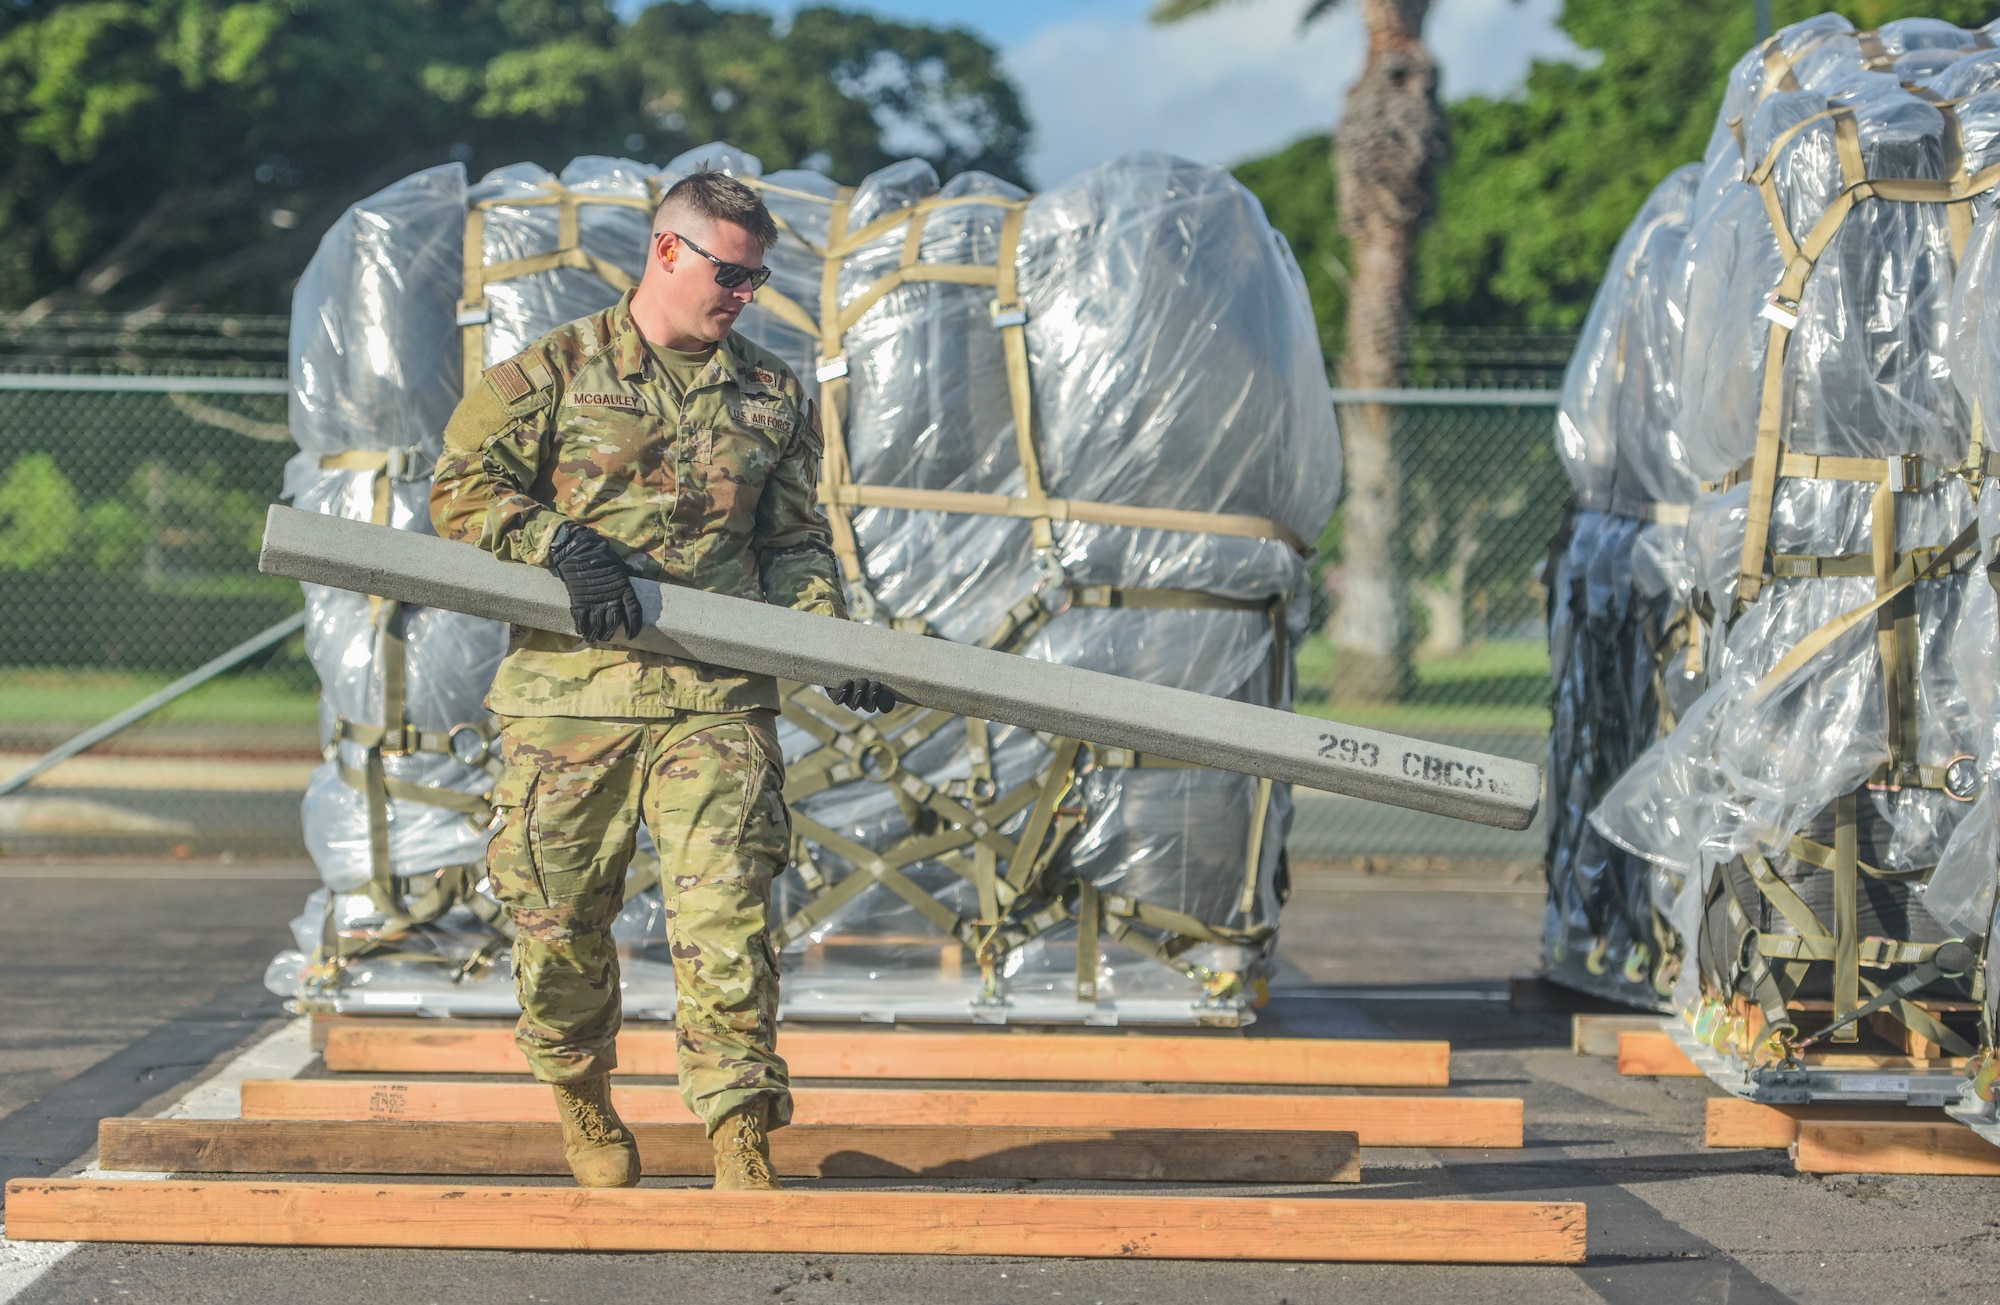 U.S. Air Force Staff Sgt. Kevin Mcgauley, 647th Logistics Readiness Squadron combat mobility flight team chief, positions dunnage for 463L pallets at Joint Base Pearl Harbor-Hickam, Hawaii, Dec. 22, 2021. 647th LRS recieved a total of 15 pallets of charcoal filters weighing 75 tons in support of the water recovery efforts on Oahu.   (U.S. Air Force photo by Tech. Sgt. Anthony Nelson Jr.)